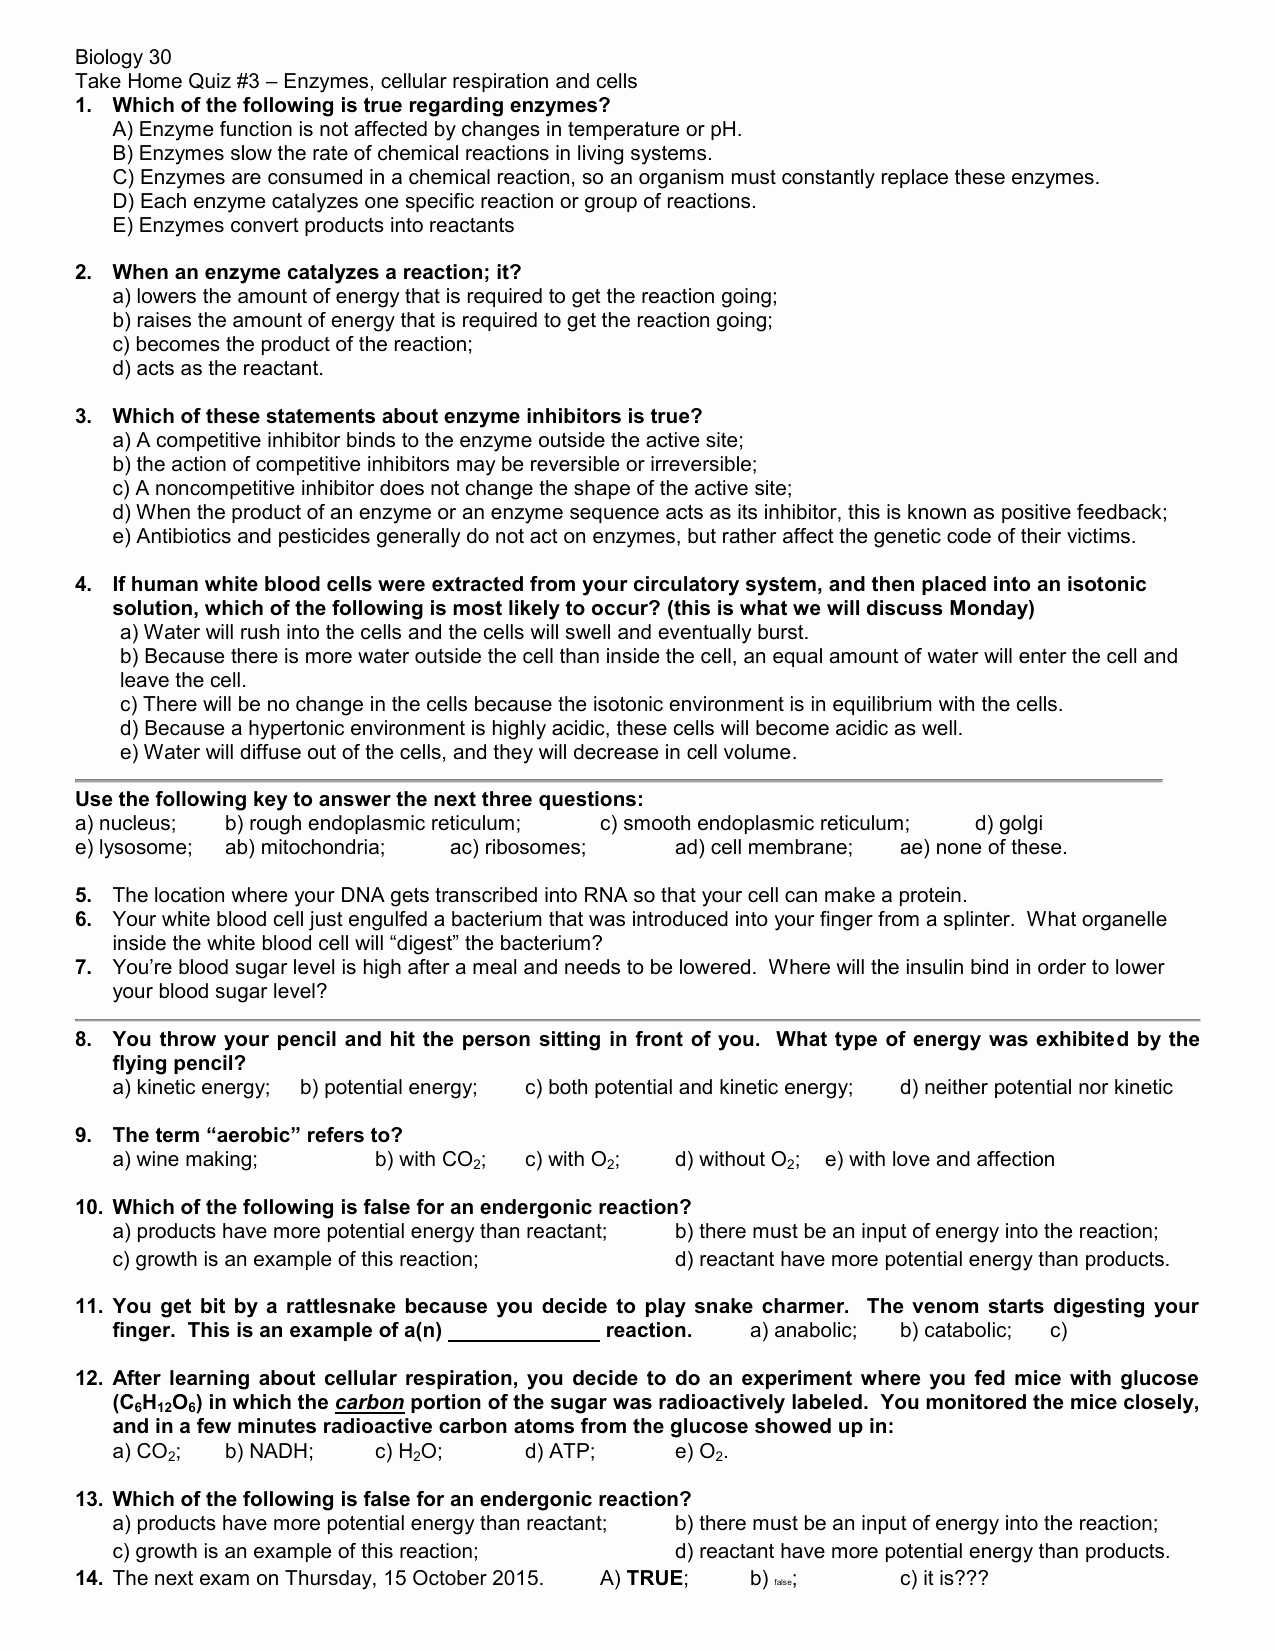 Photosynthesis and Cellular Respiration Worksheet Answers as Well as Potential and Kinetic Energy Roller Coaster Worksheet Unique Kinetic